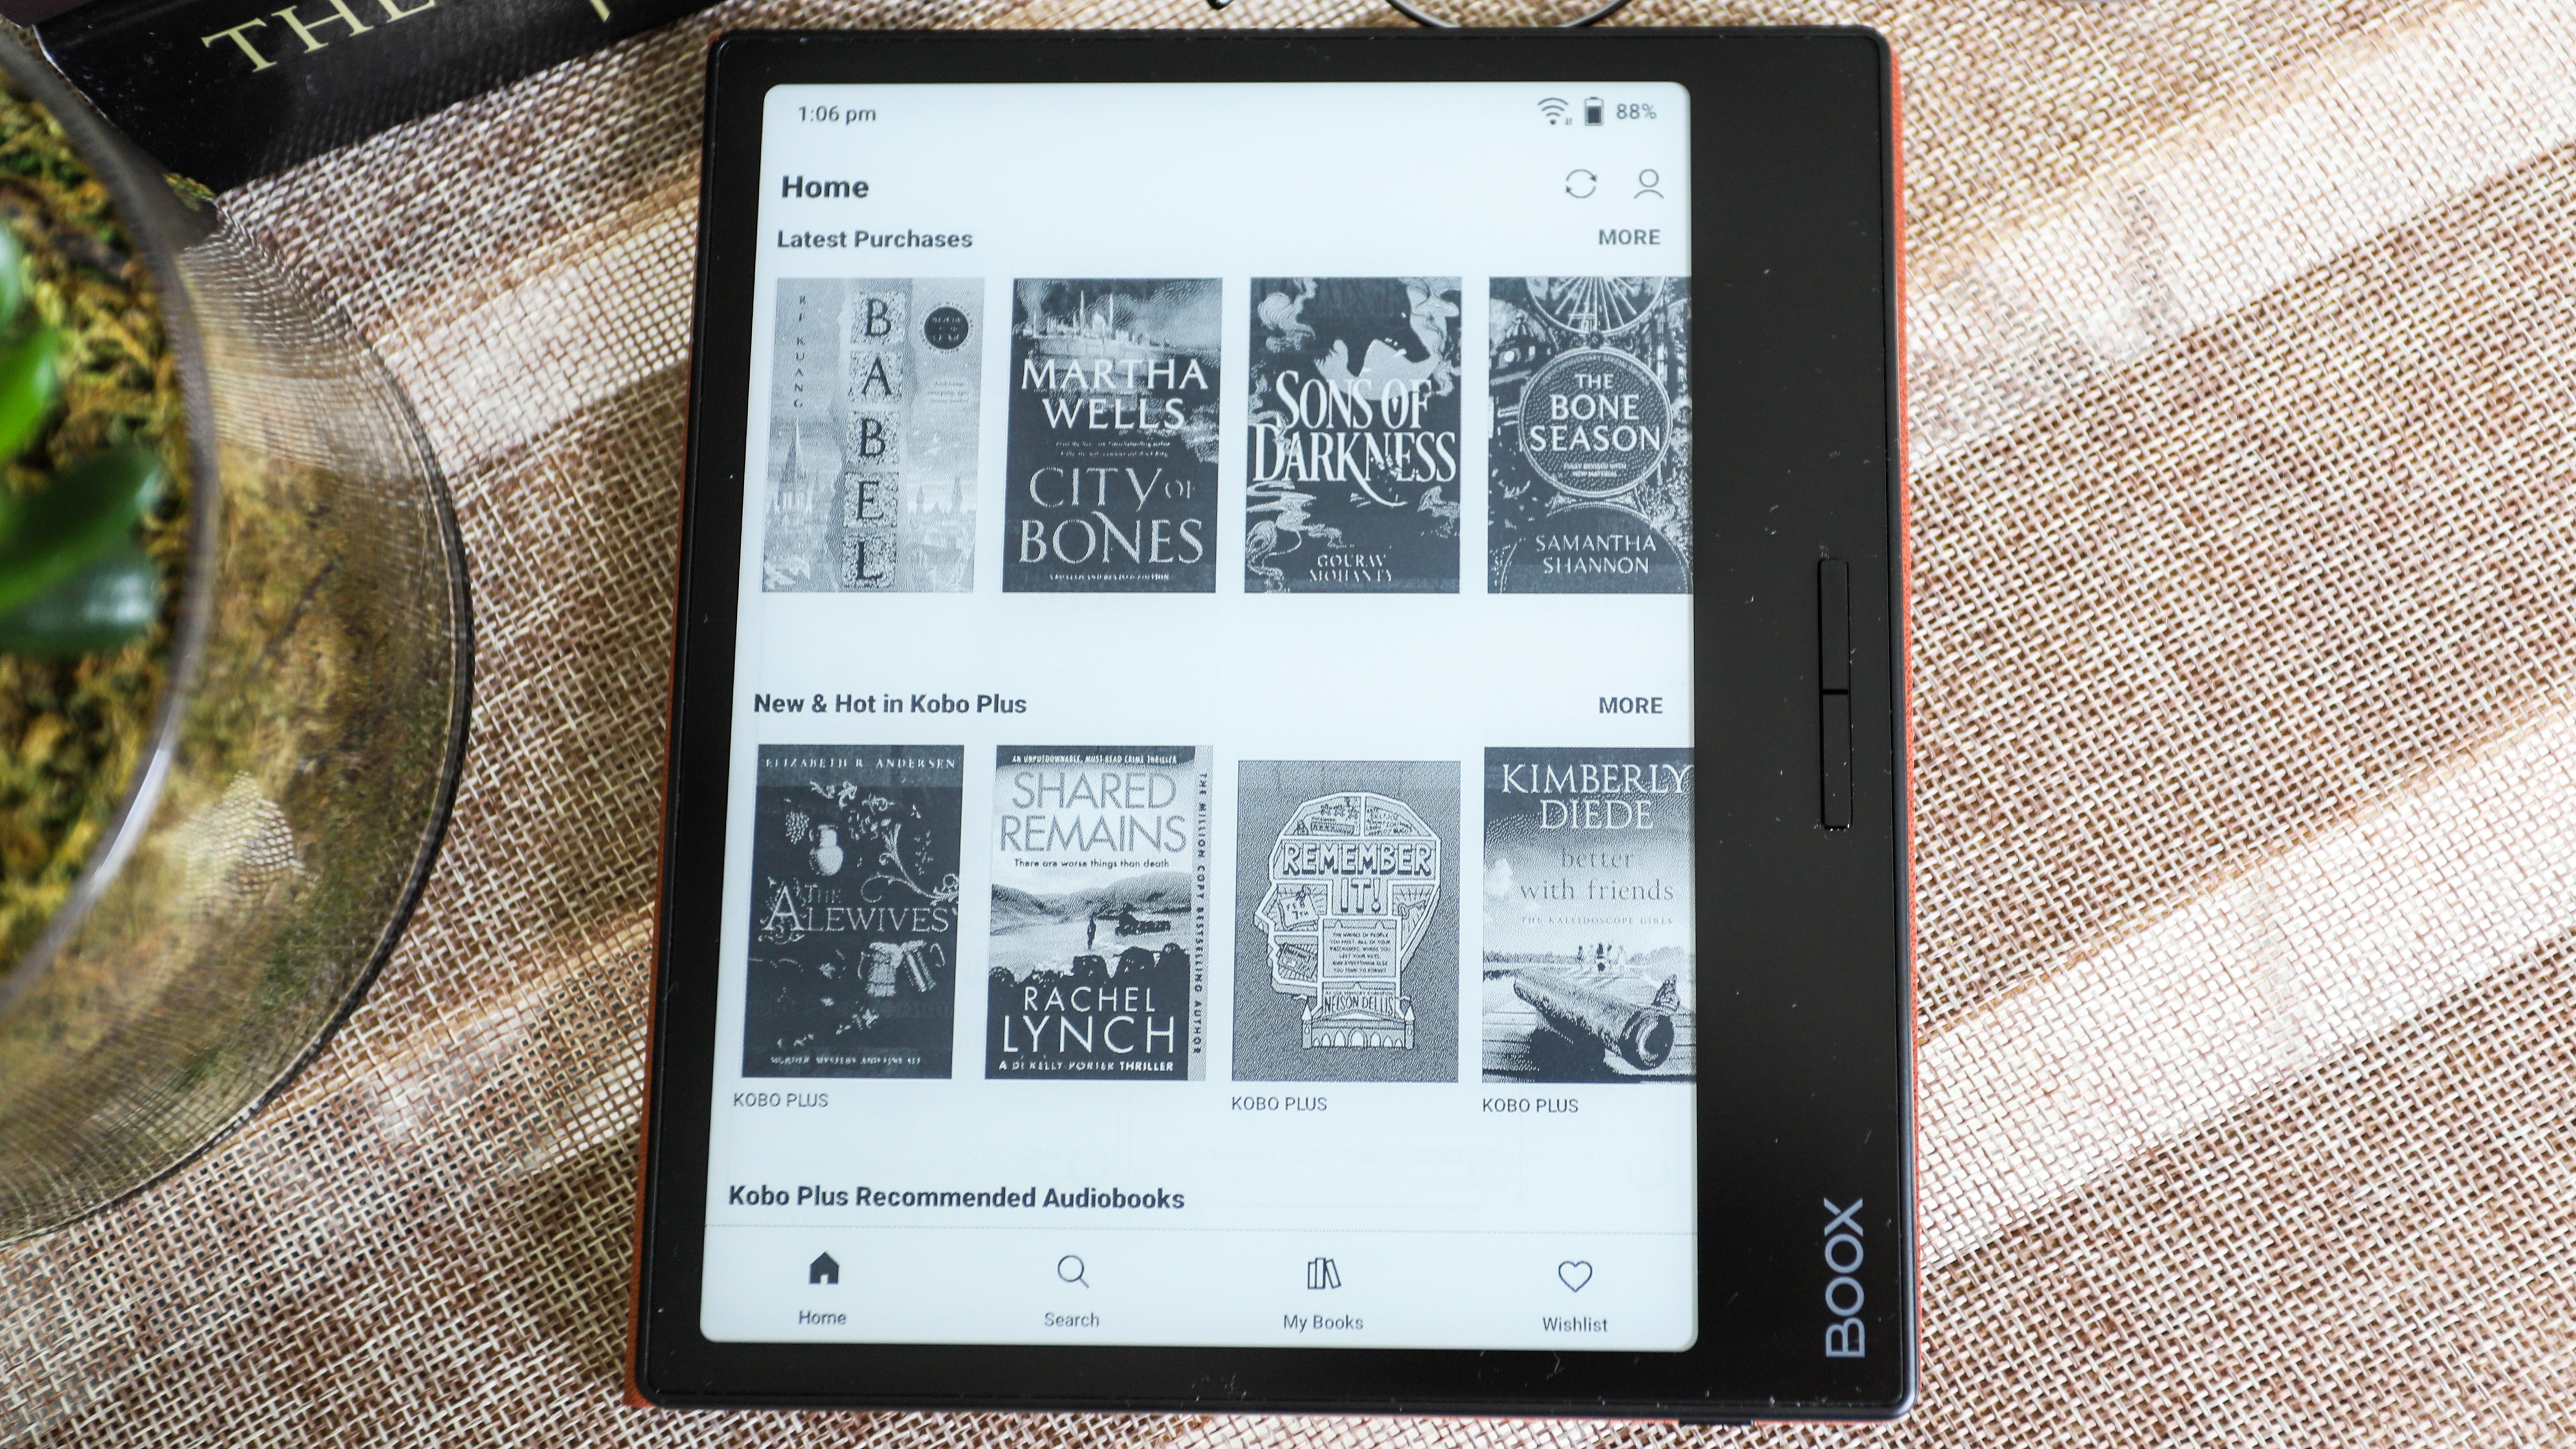 Within the Kobo app on the Onyx Boox Page